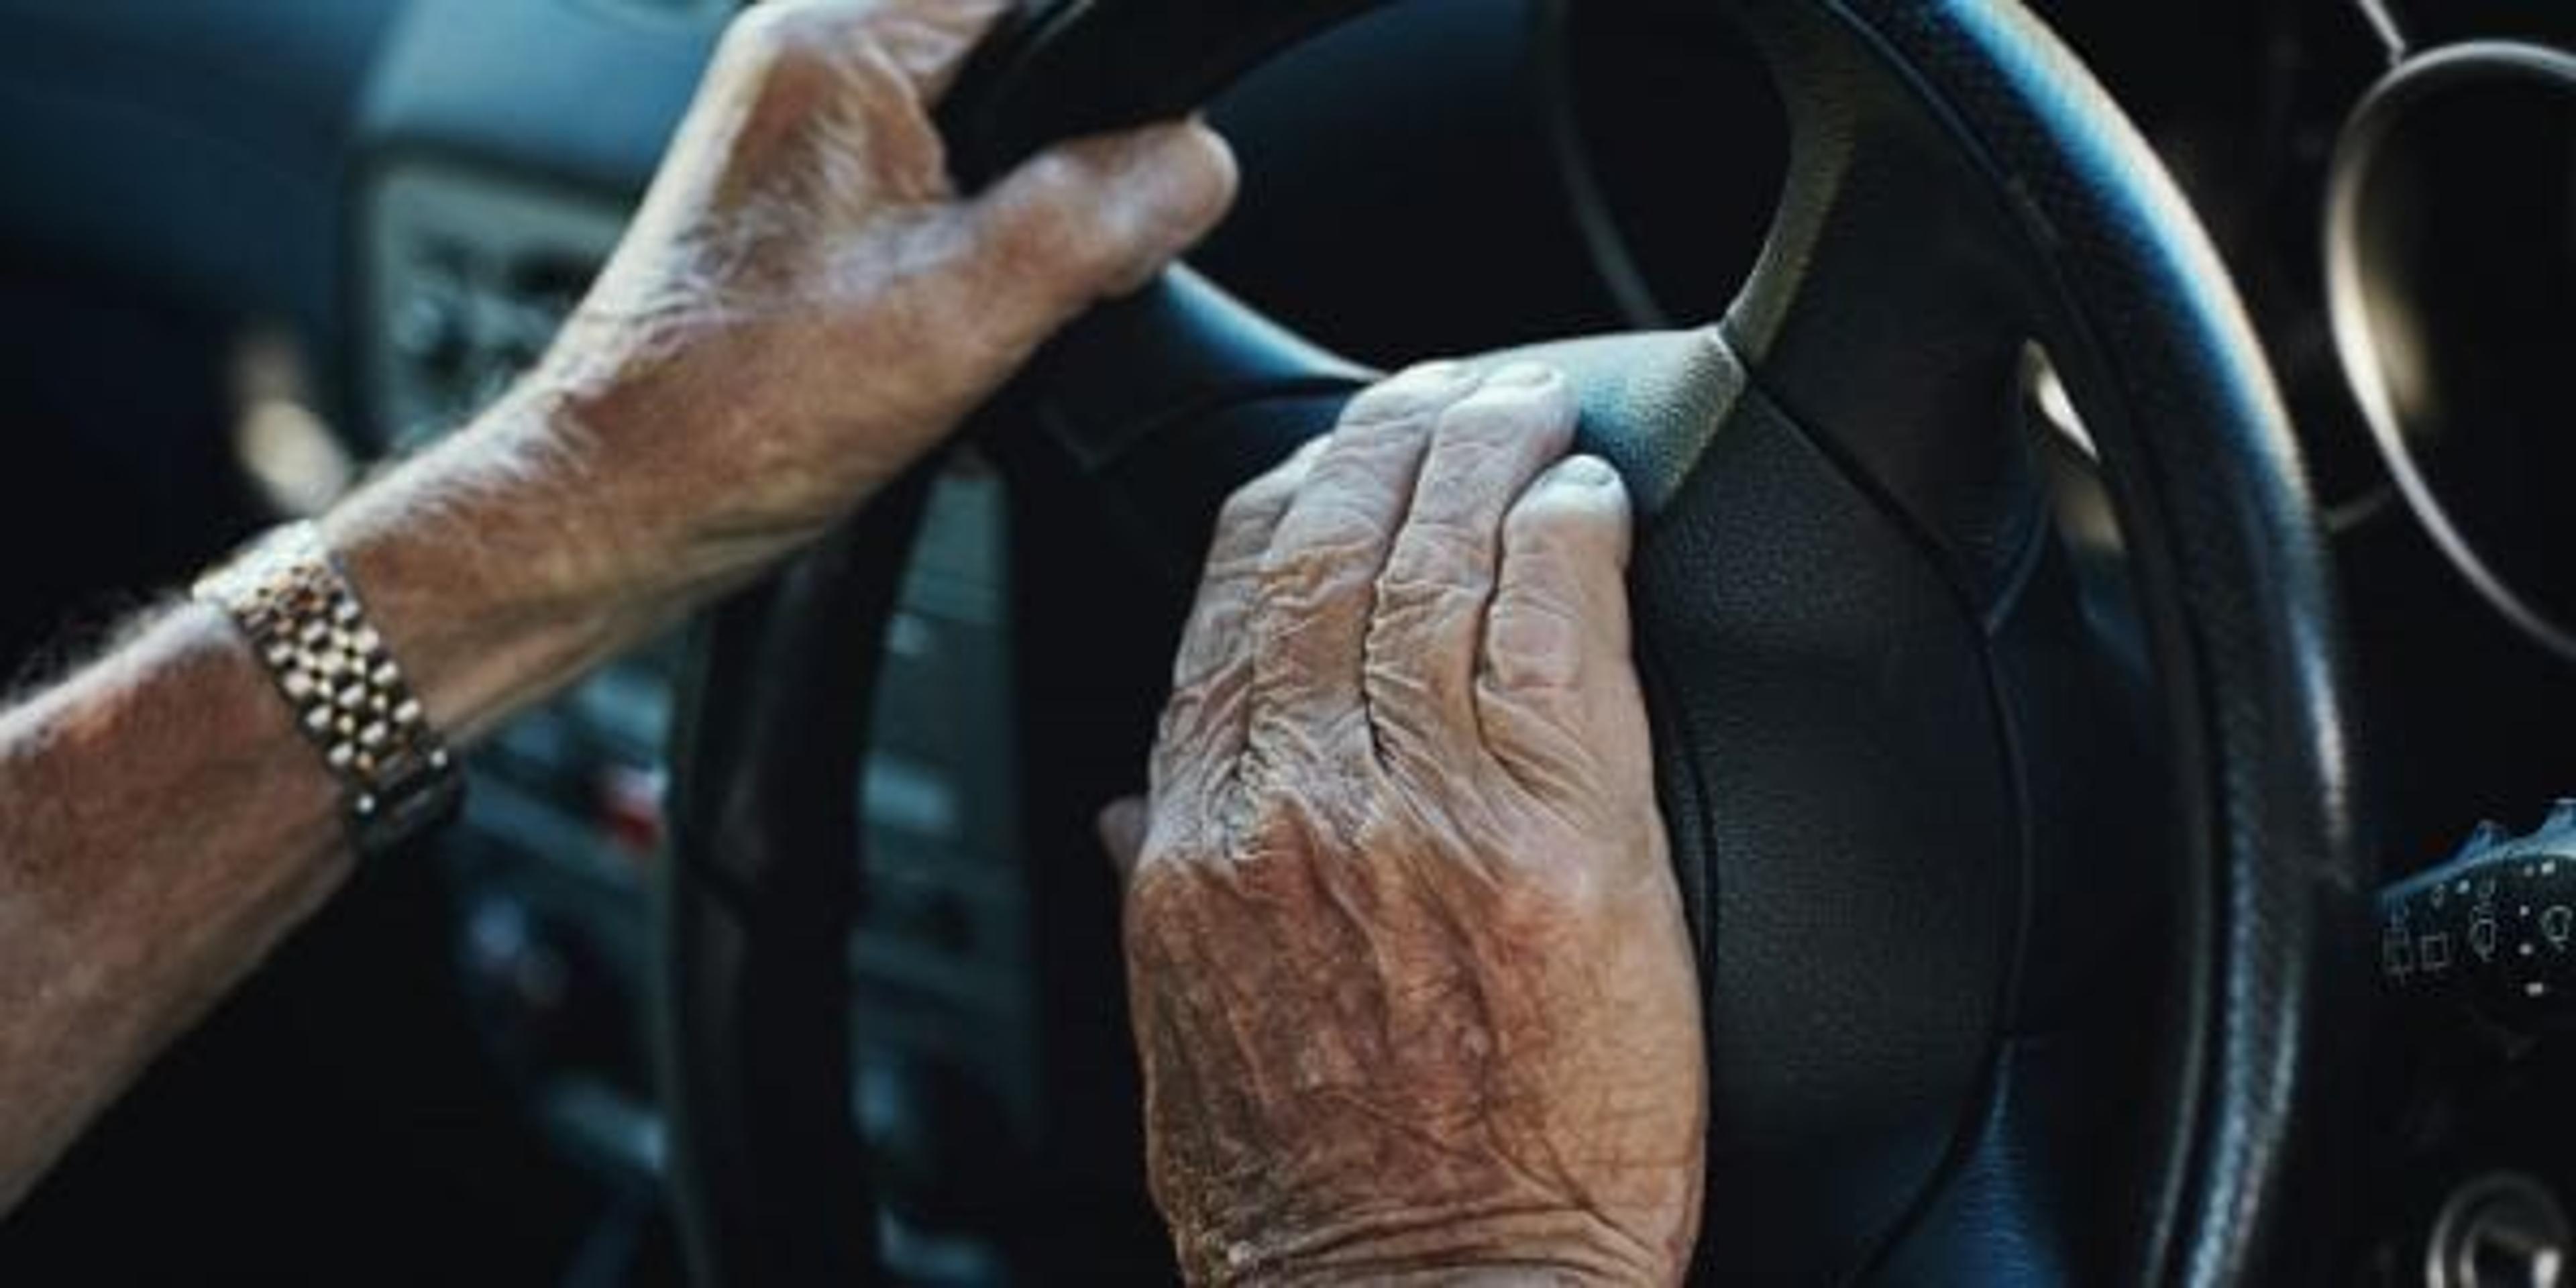 How to Know When an Elderly Person Is No Longer a Safe Driver